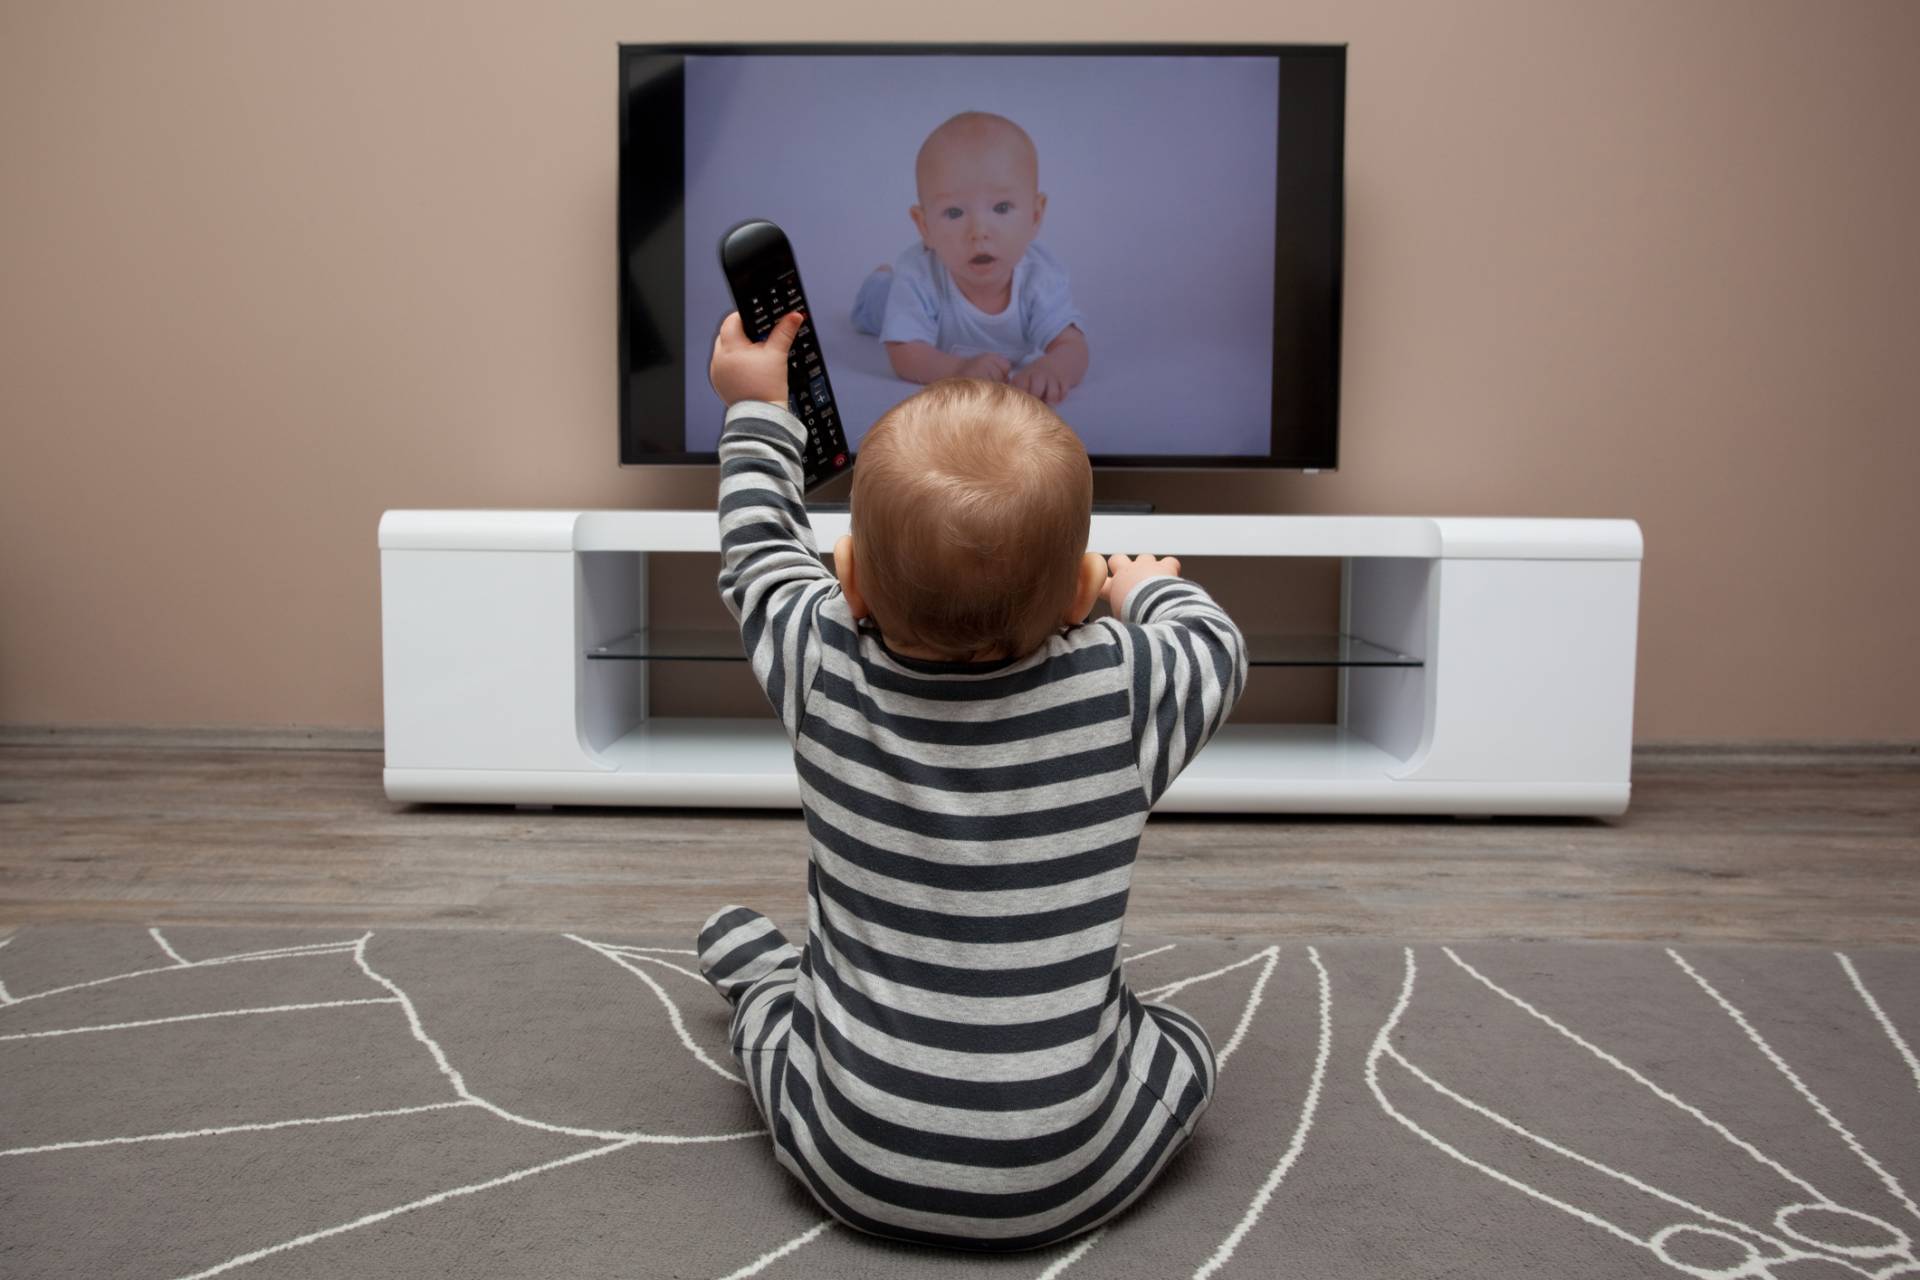 Can babies learn from Ms. Rachel and other baby TV shows?